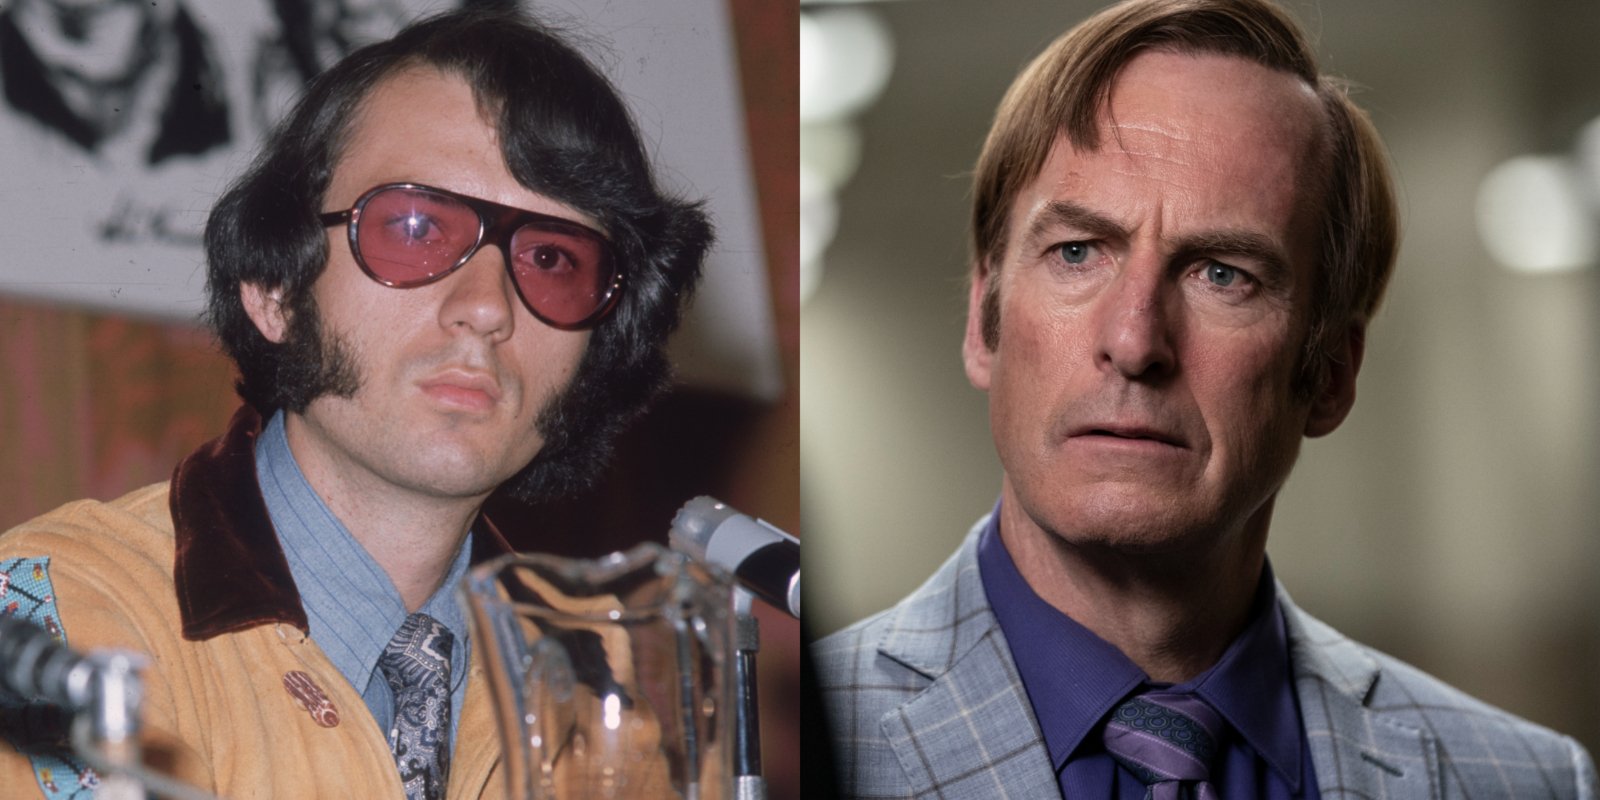 Mike Nesmith in a side by side photograph with 'Better Call Saul' star Bob Odenkirk.